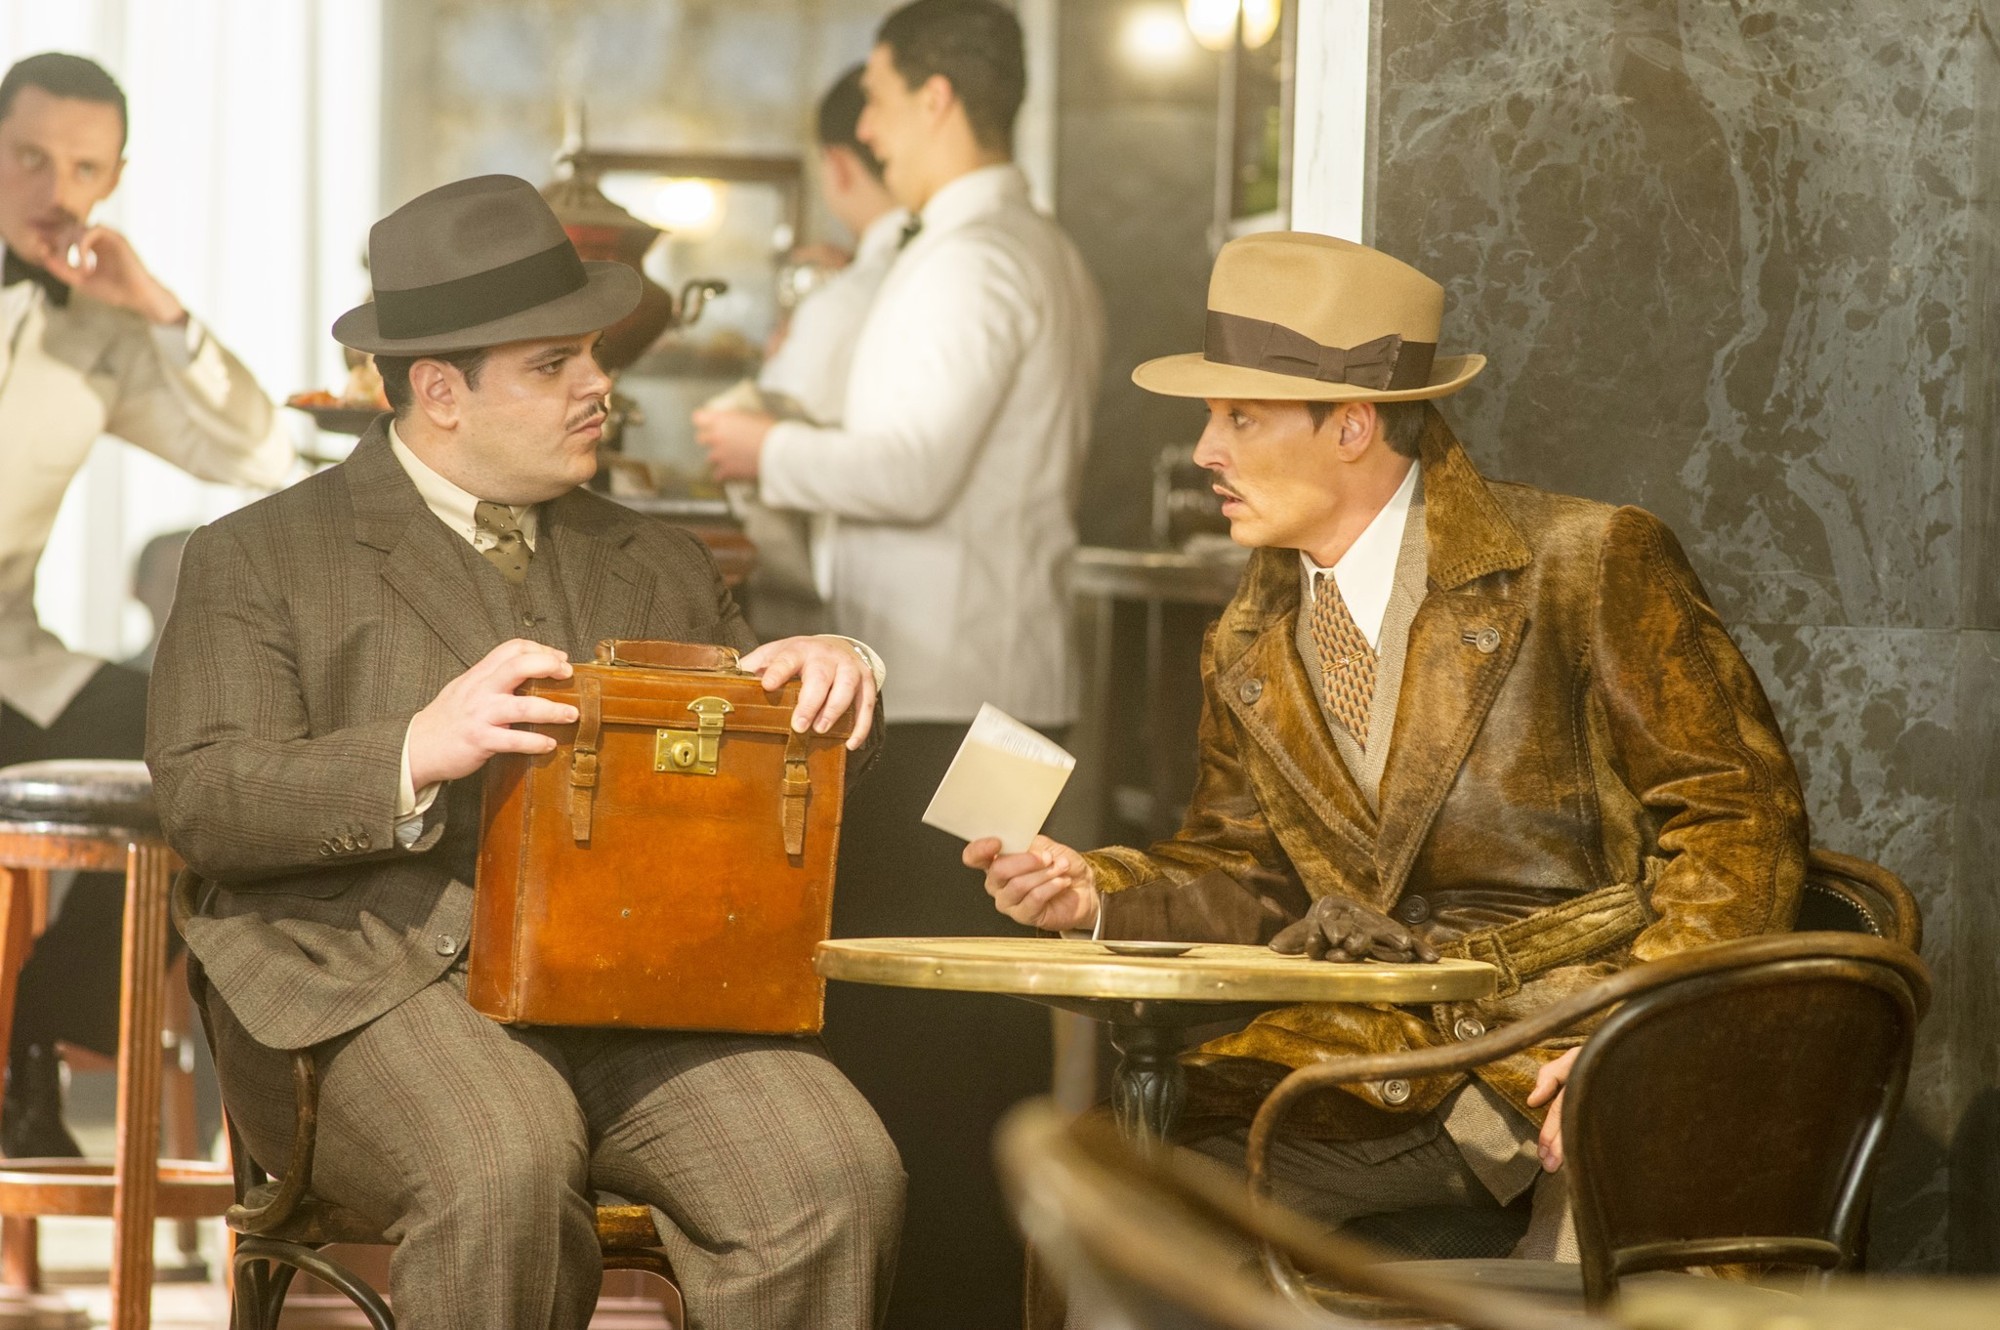 Josh Gad stars as Hector MacQueen and Johnny Depp stars as Ratchett in 20th Century Fox's Murder on the Orient Express (2017)